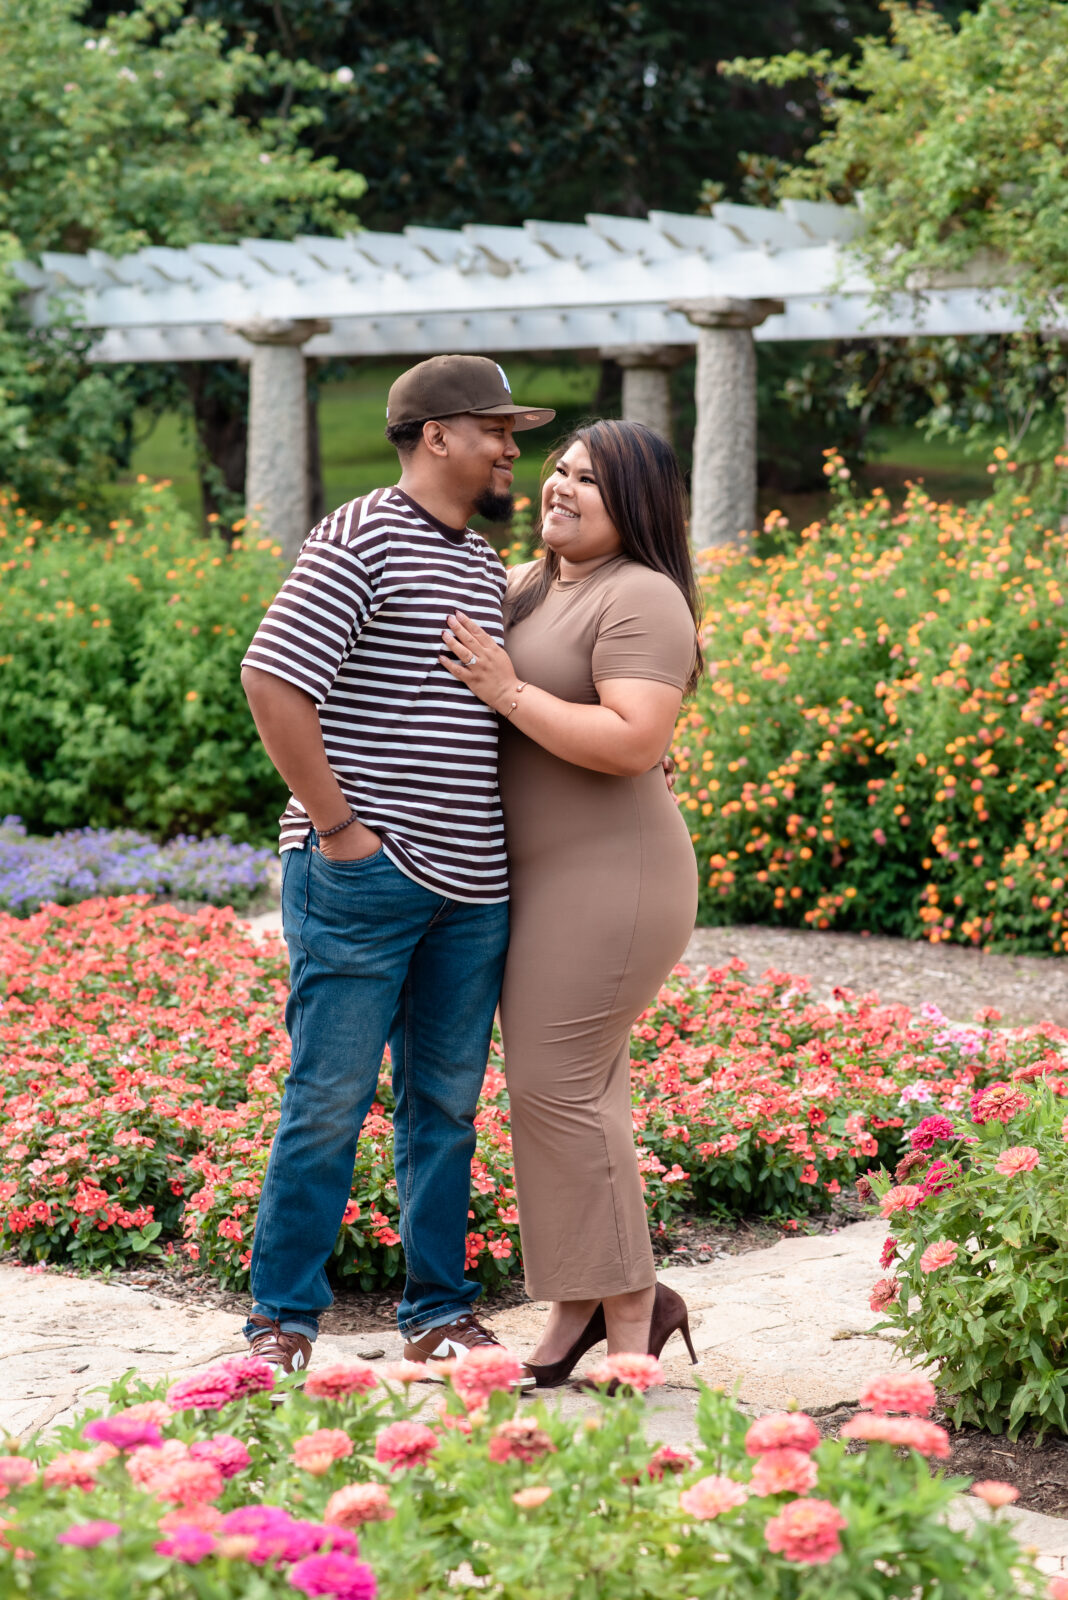 Happy couple capturing their summer love during a mini session.